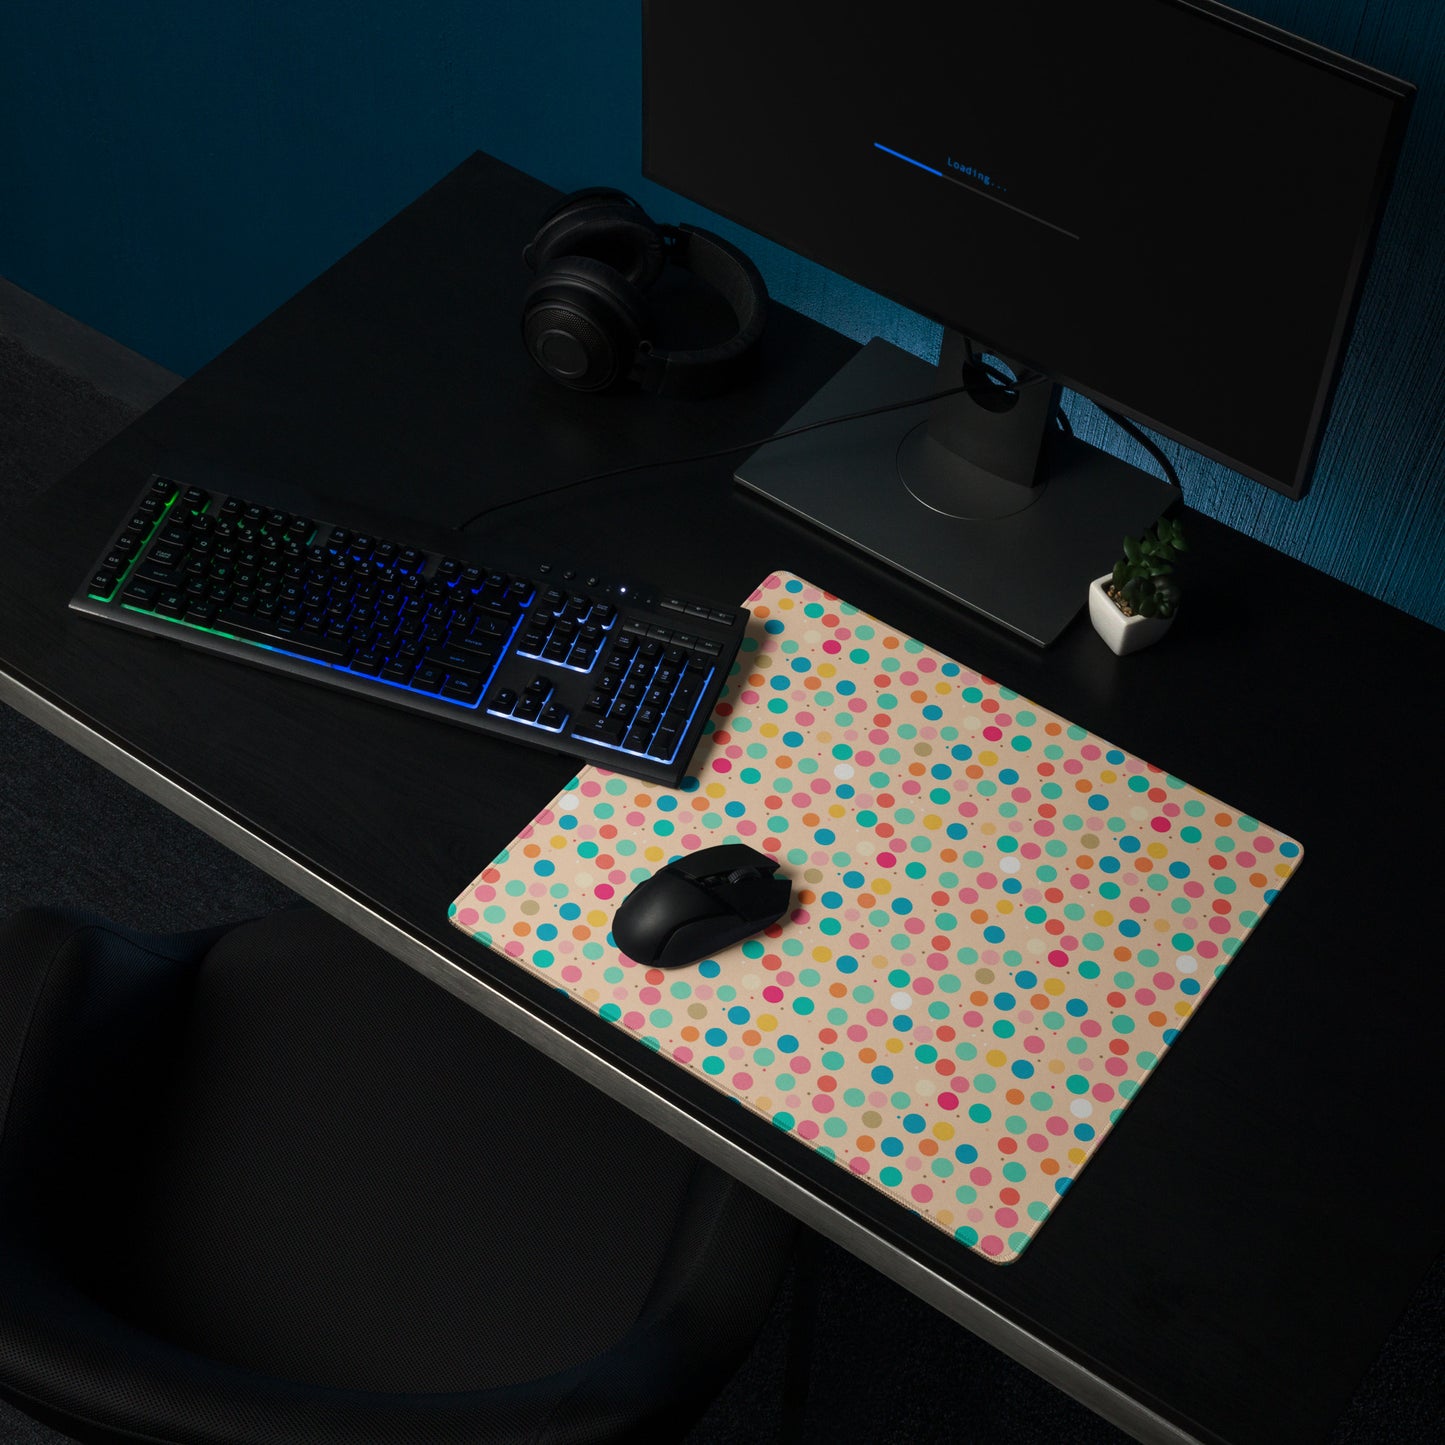 A 18" x 16" desk pad with a colorful polka dot pattern sitting on a desk.